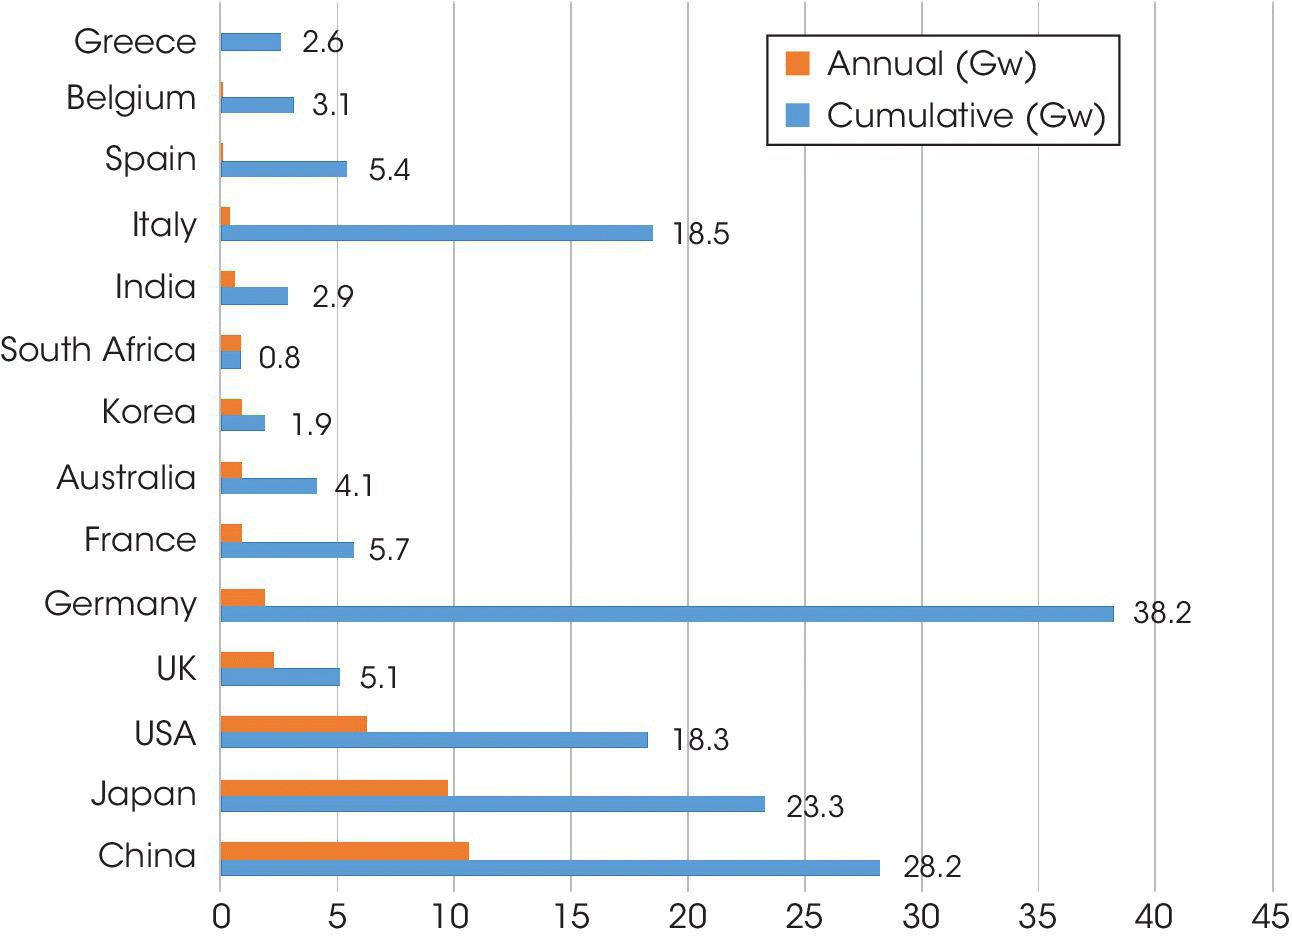 Clustered horizontal bar graph of top 14 countries in terms of cumulative capacity as of 2014, with in order of increasing annual capacity from top to bottom. Germany has the highest cumulative capacity.